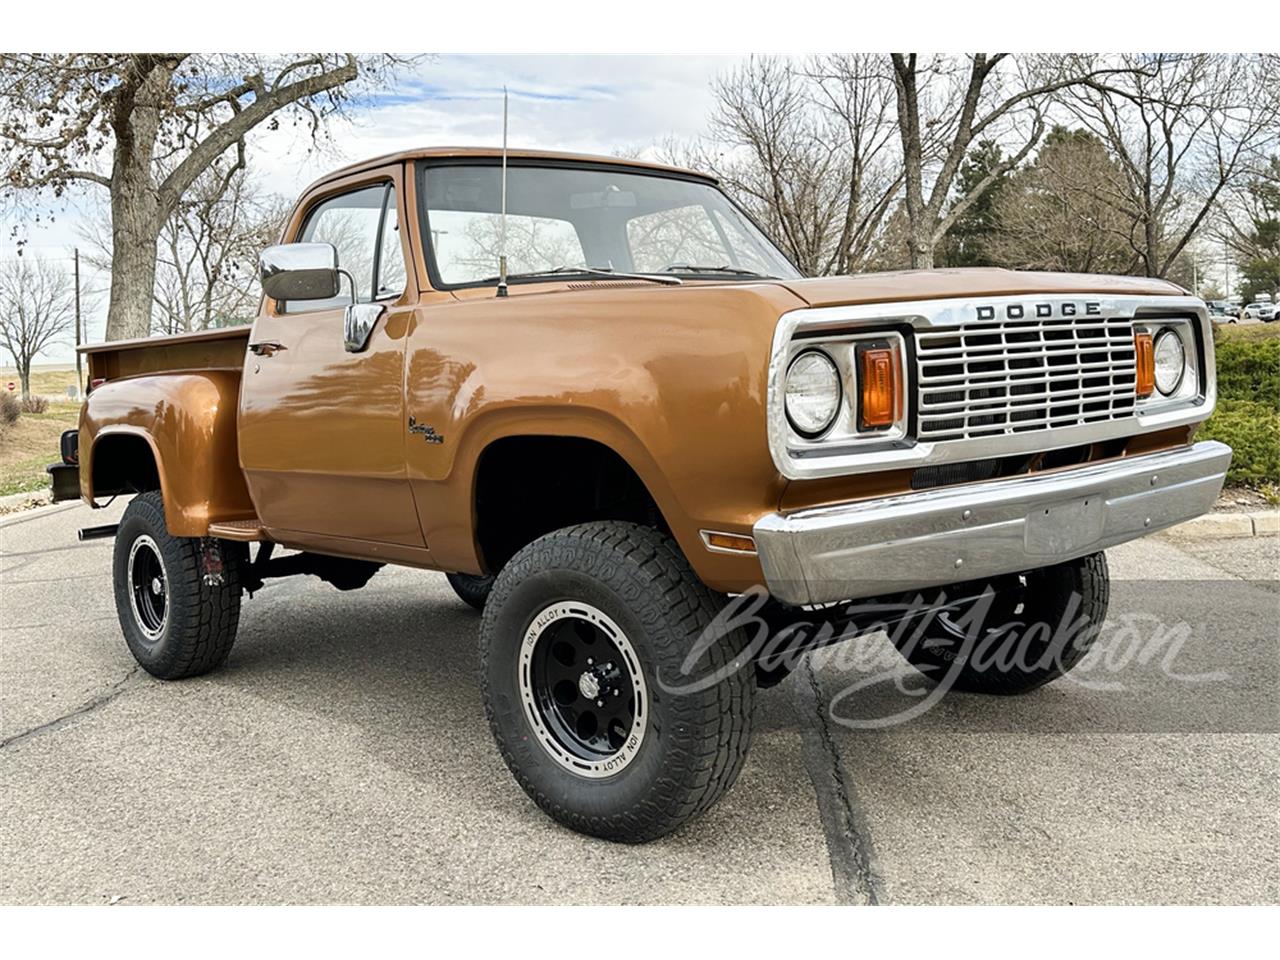 For Sale at Auction: 1978 Dodge Power Wagon in Scottsdale, Arizona for sale in Scottsdale, AZ